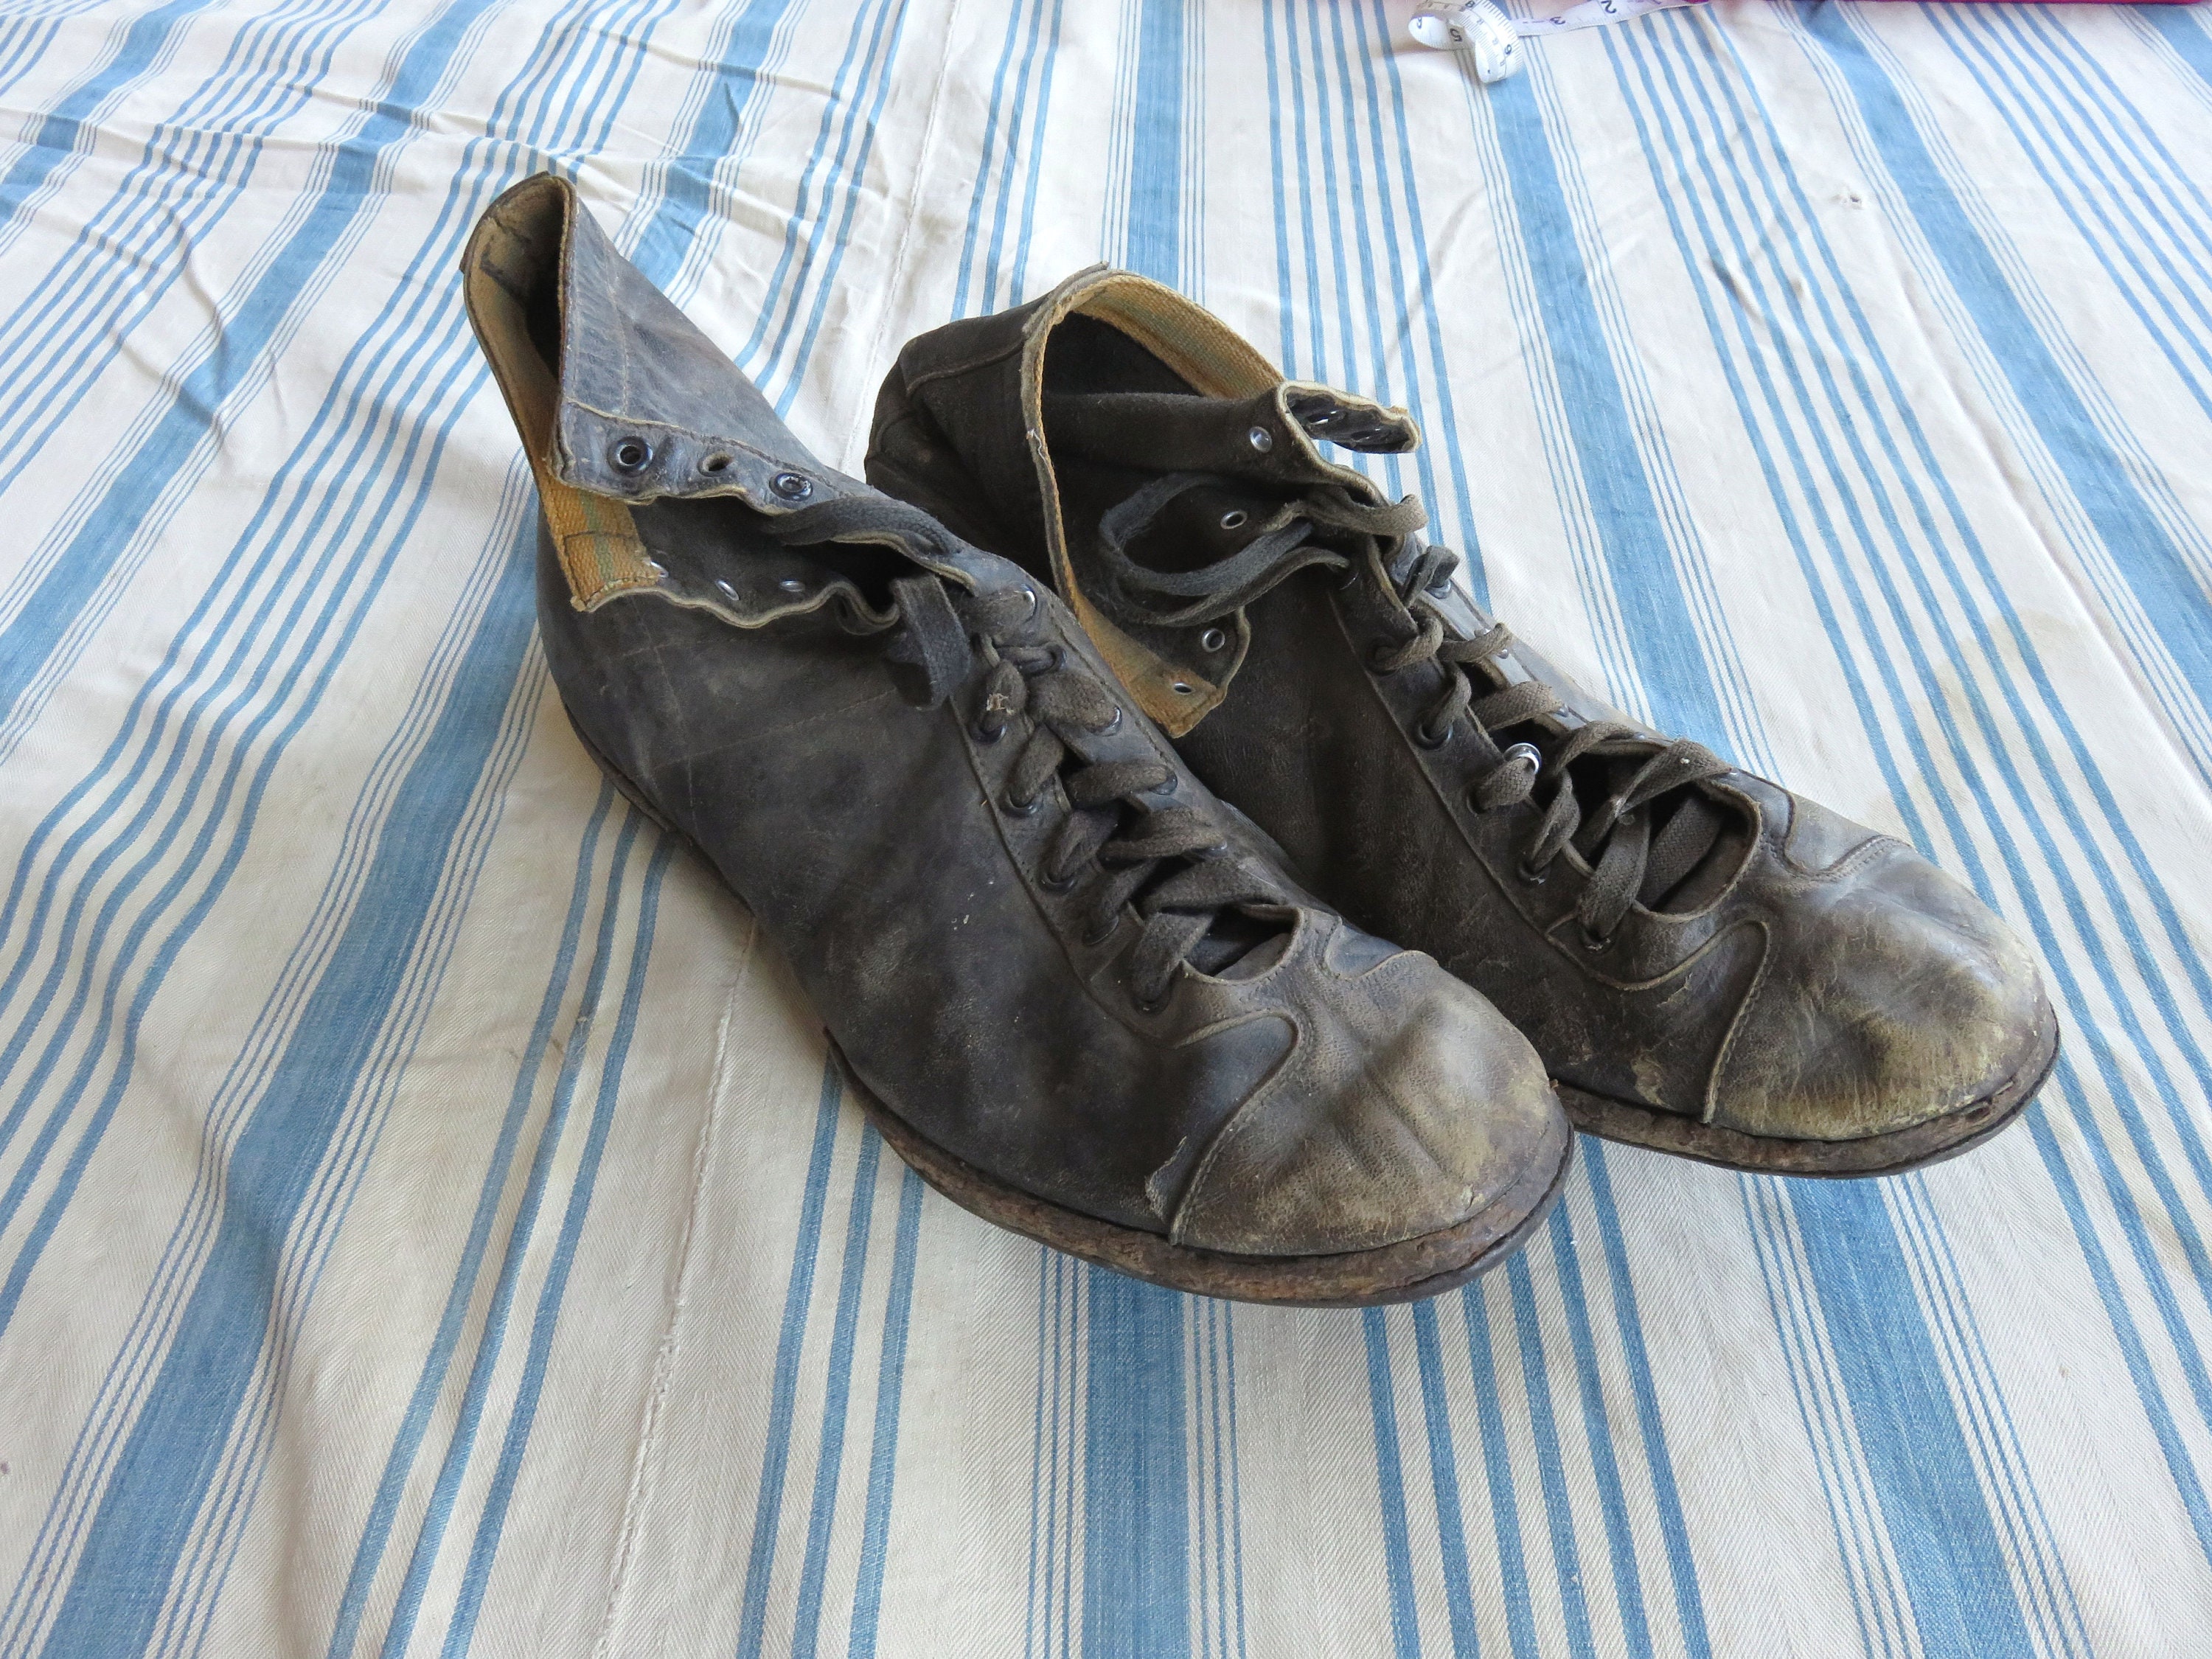 Vintage Boxing Shoes - Etsy